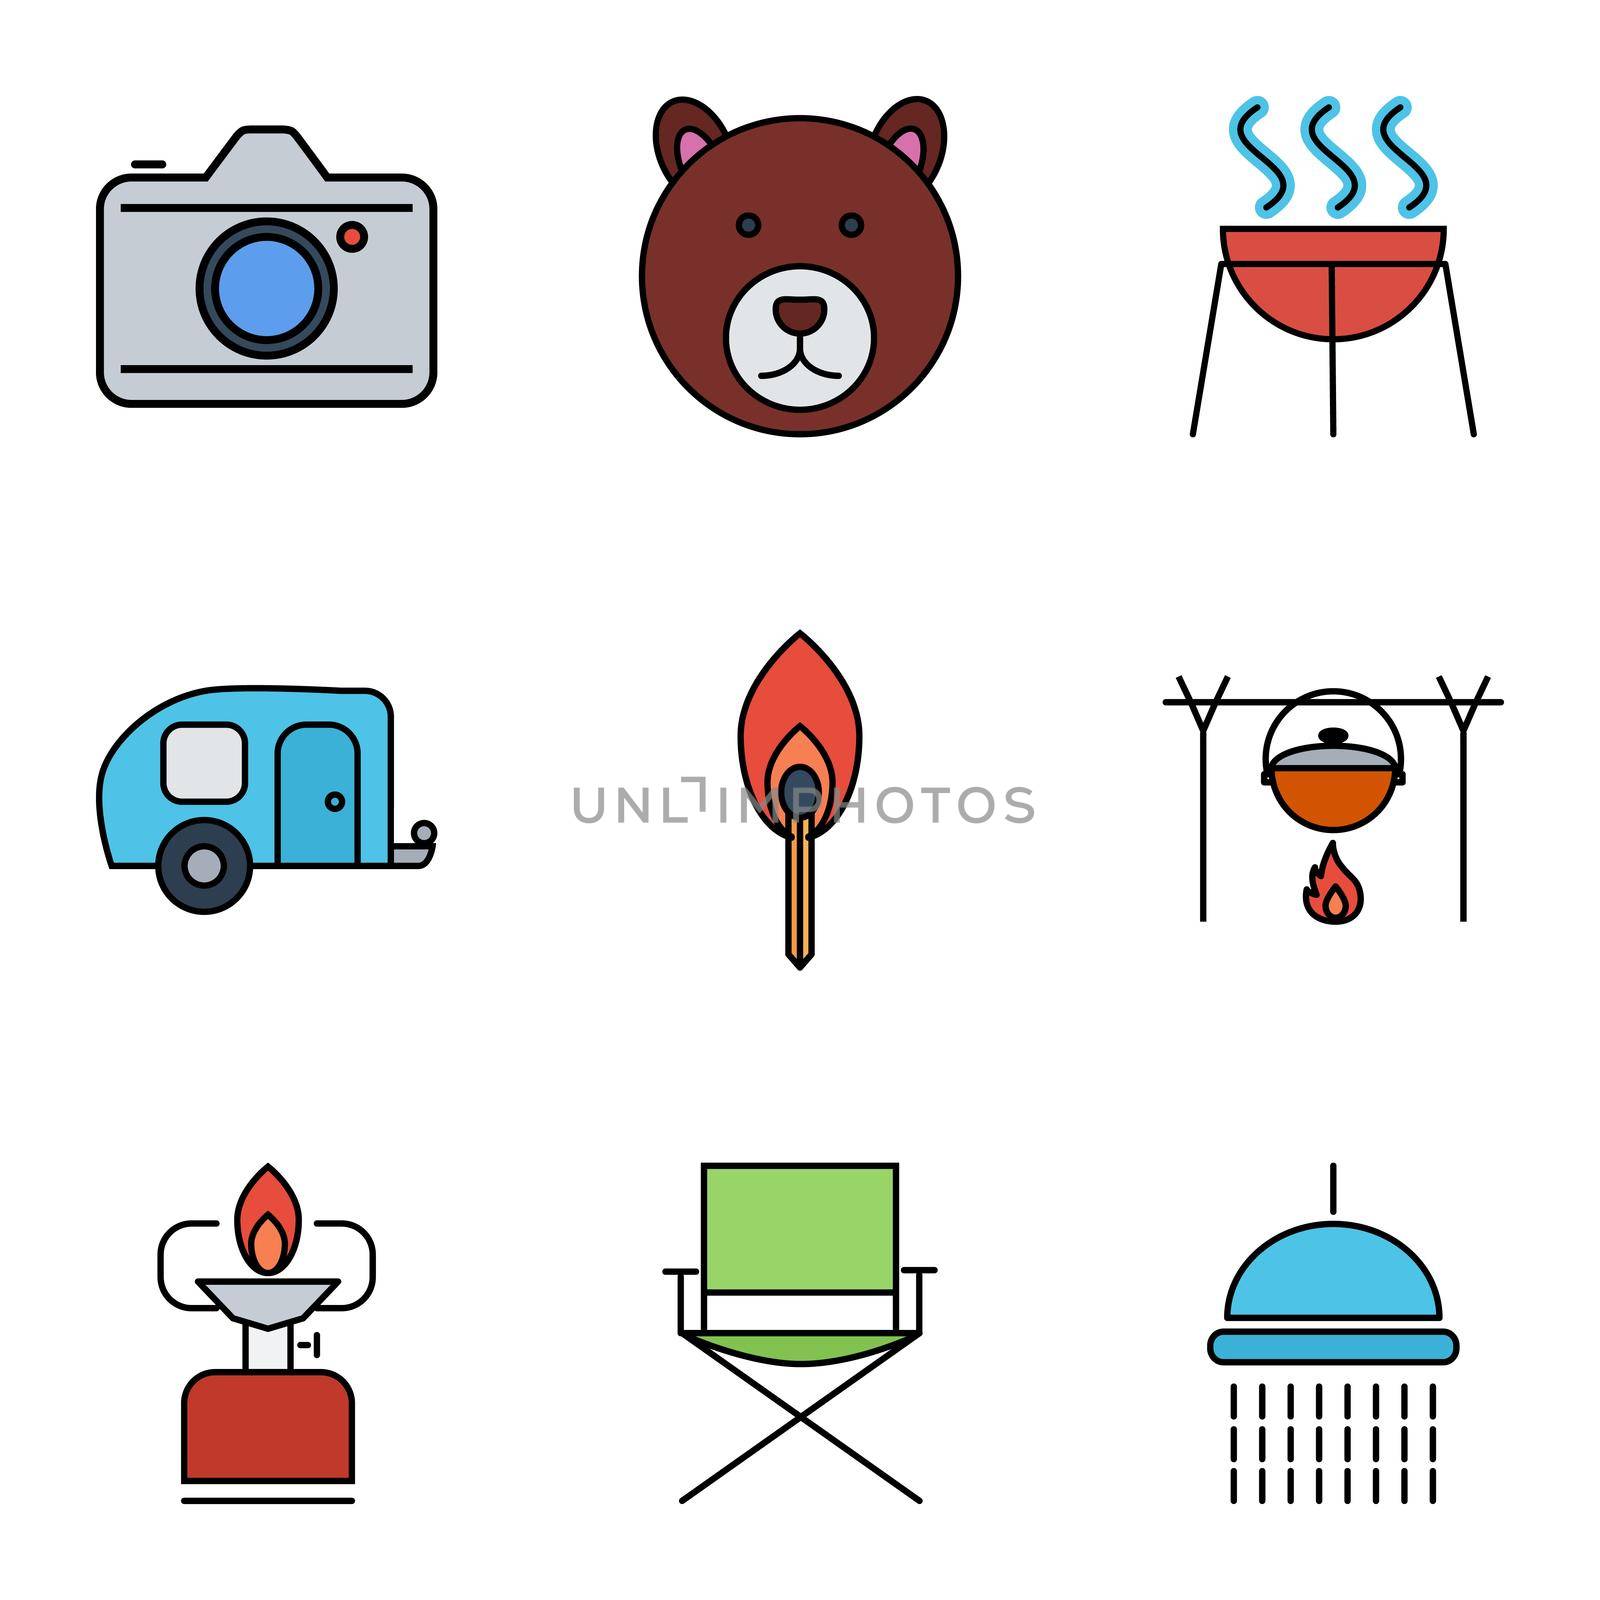 Camping flat icon set for web and mobile applications. Set includes - bear, camera, BBQ, trailer, match, pot, camping stove, chair, shower. It can be used as - logo, pictogram, icon, infographic element.